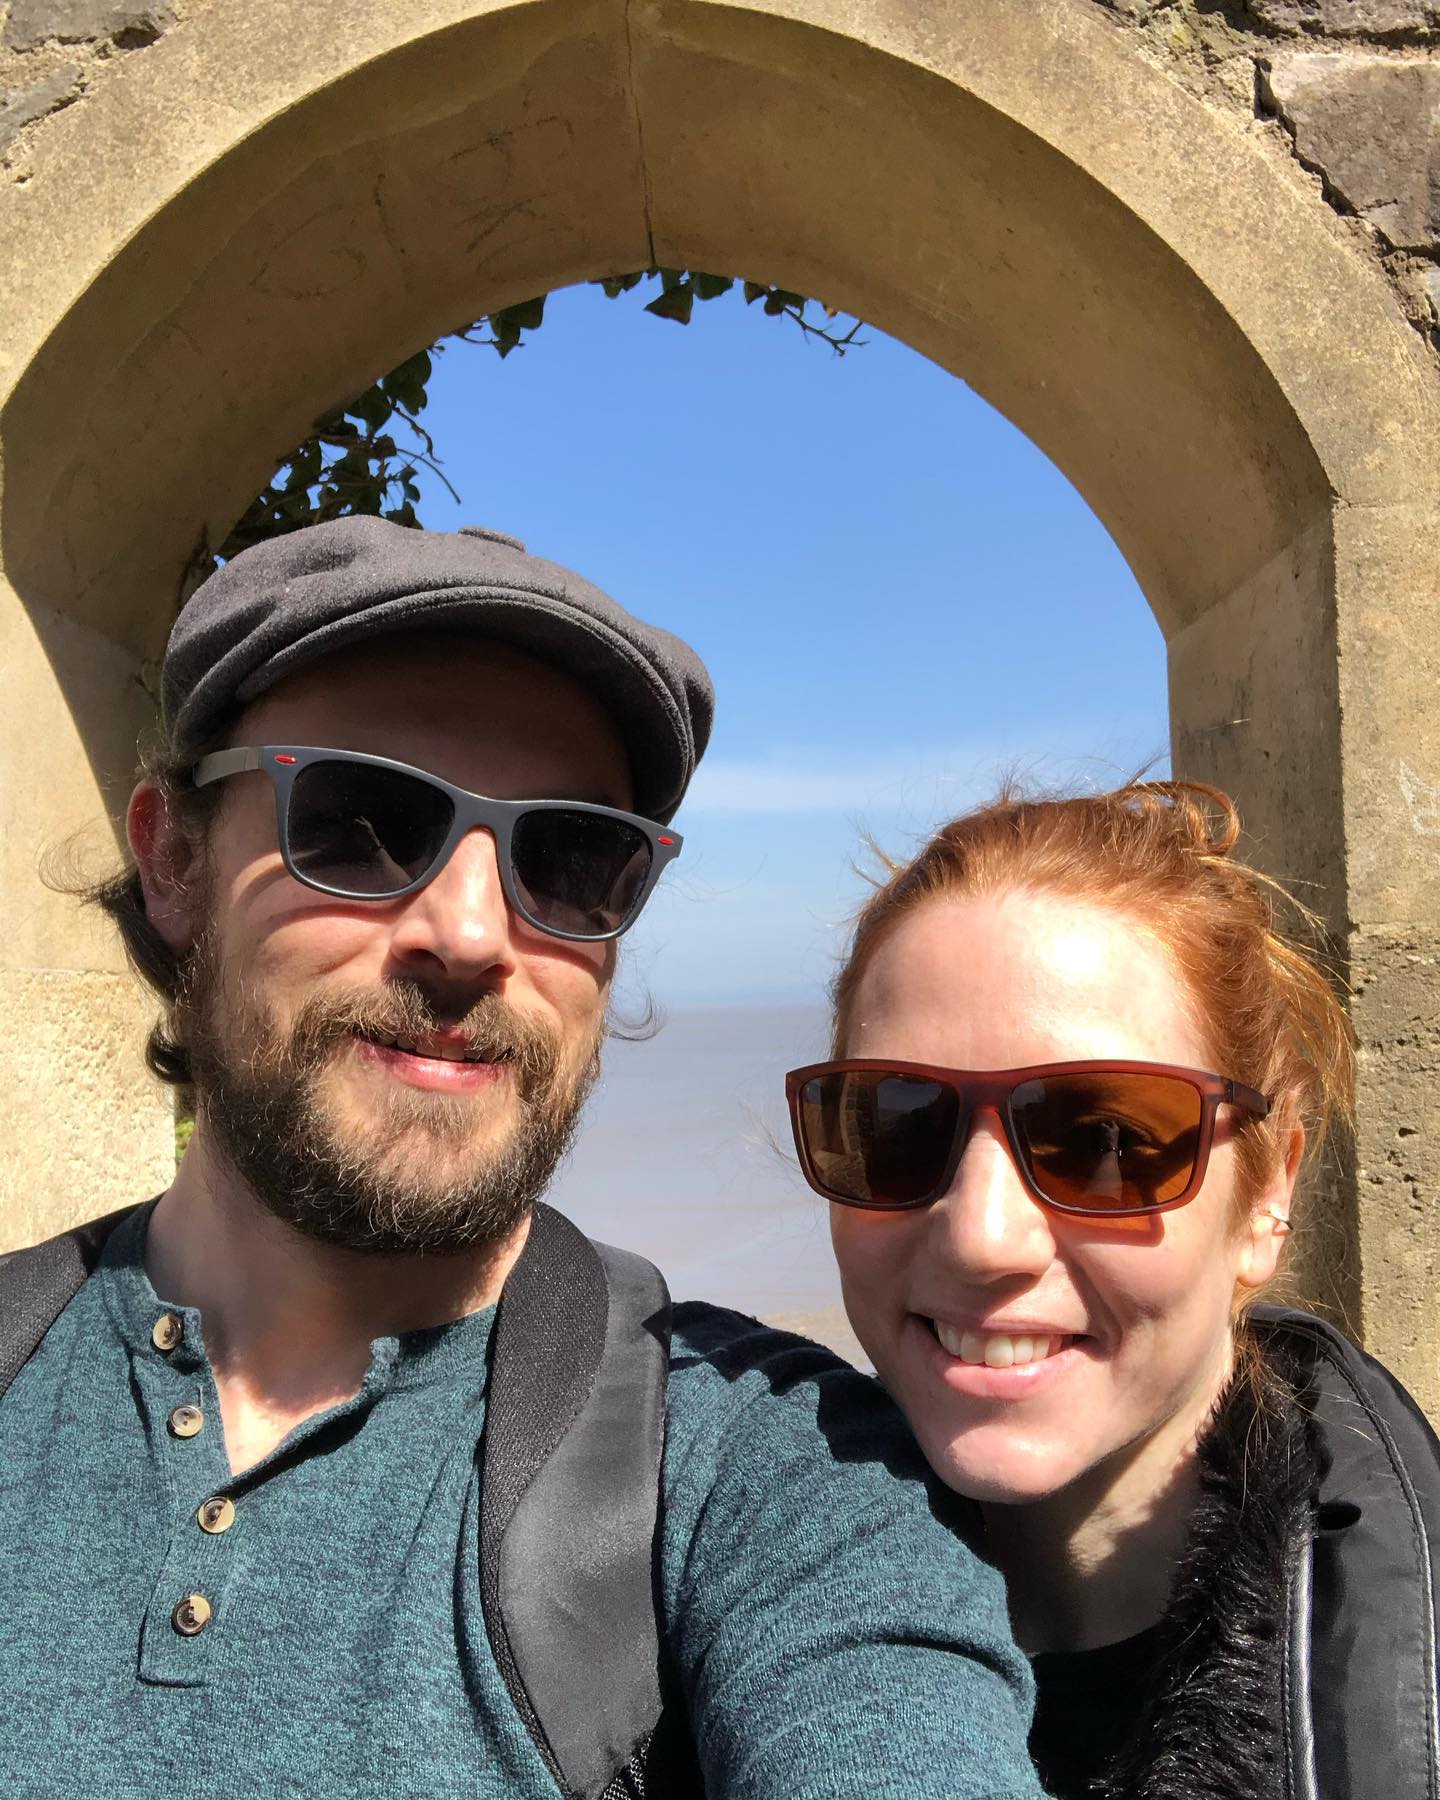 We are taking today off to celebrate our Anniversary. What a lovely way to spend the morning, taking a romantic walk along Clevedon coastal footpath #anniversary #dayoff #clevedon #poetswalk #bythesea #22years